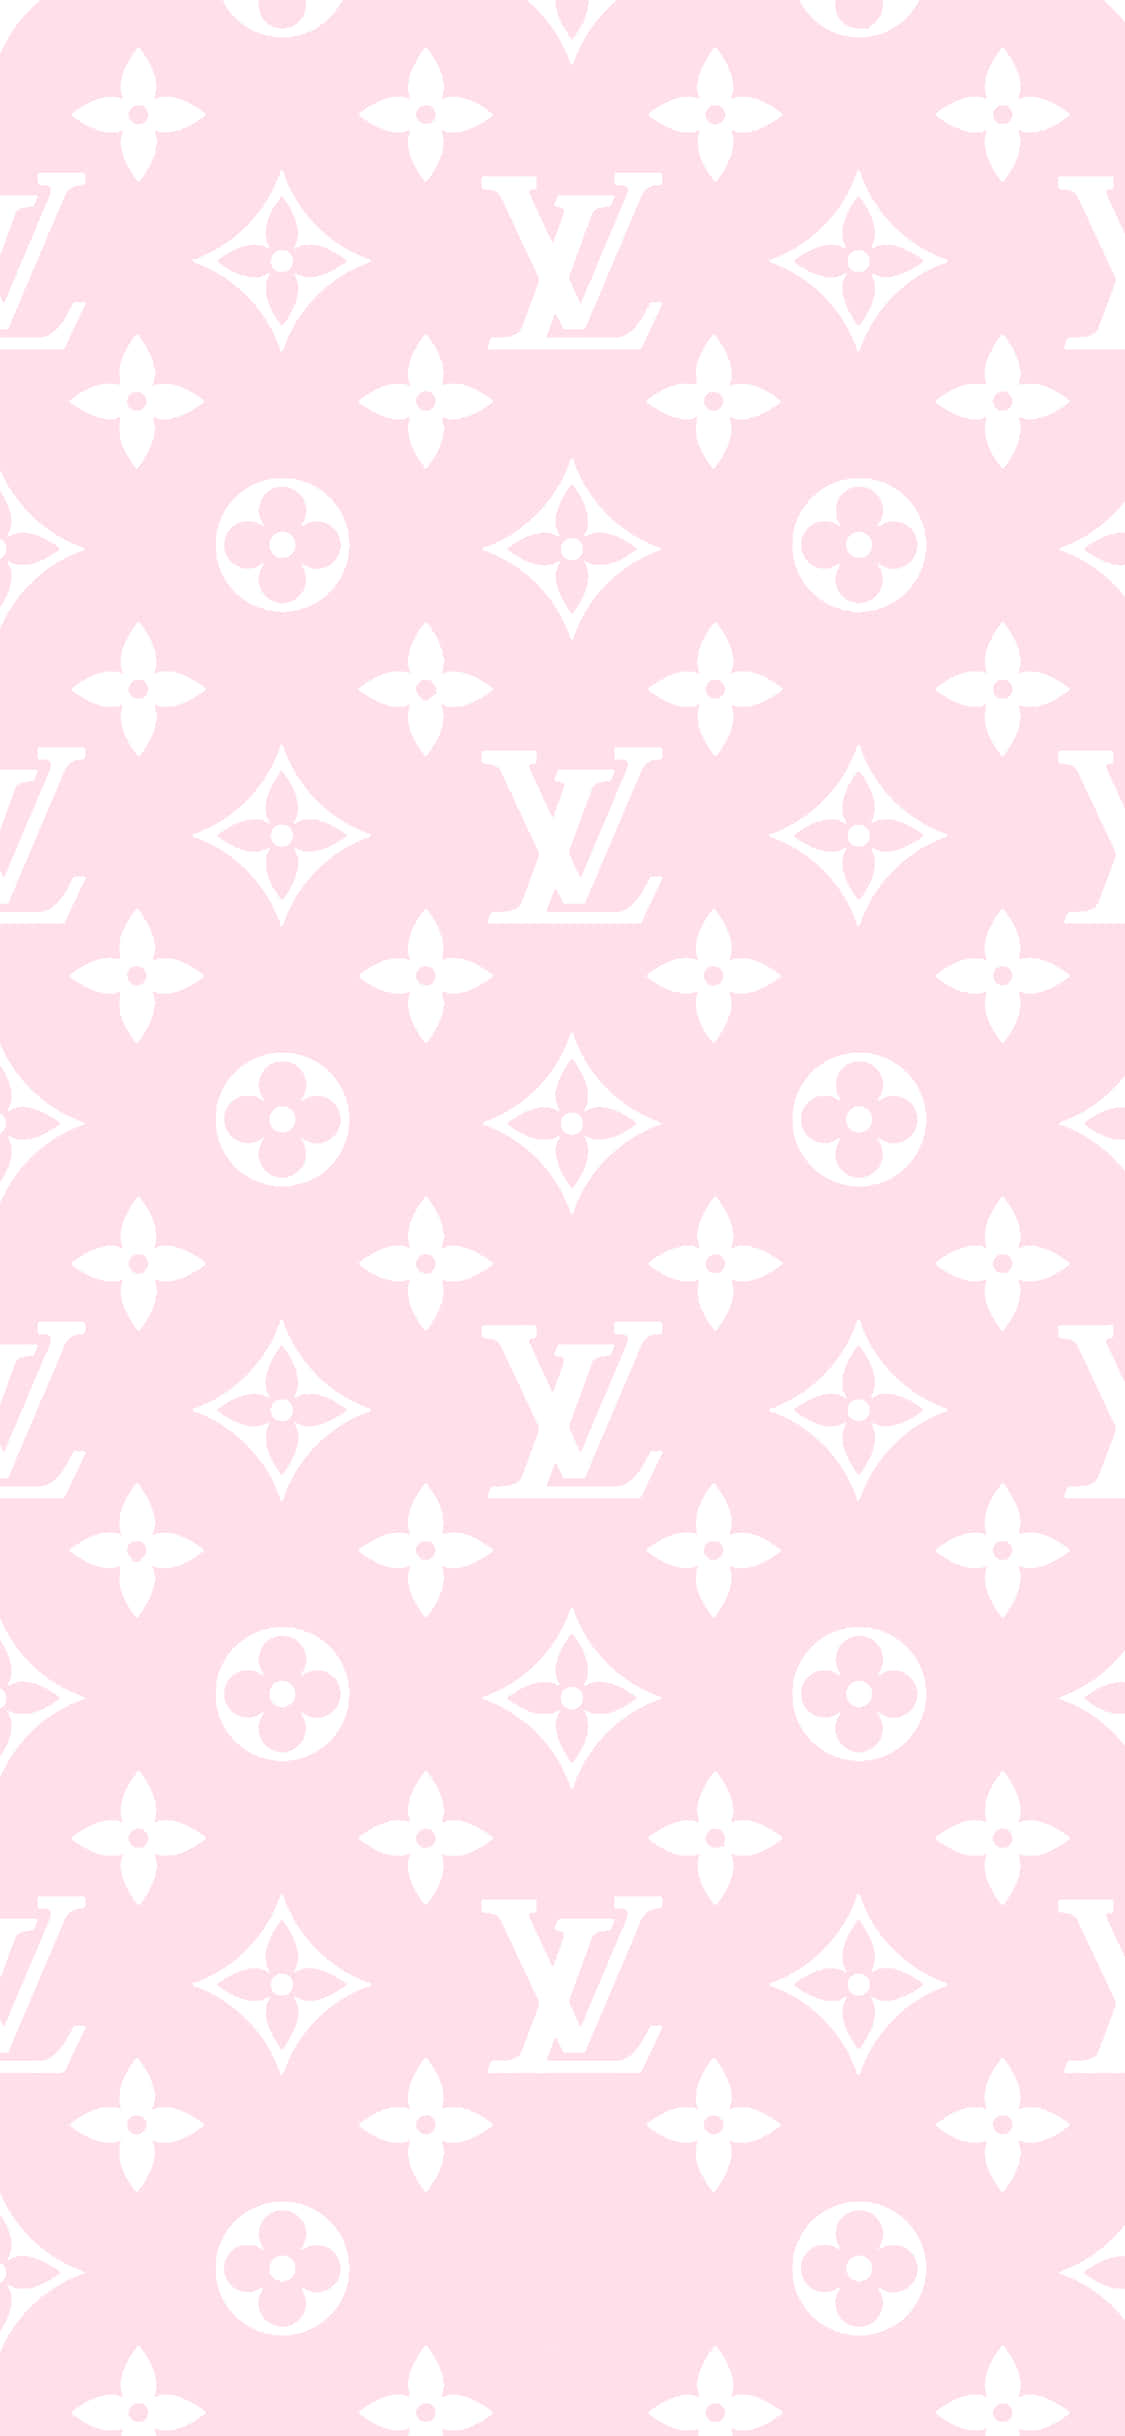 Download A Pink And White Louis Vuitton Pattern Wallpaper | Wallpapers.com